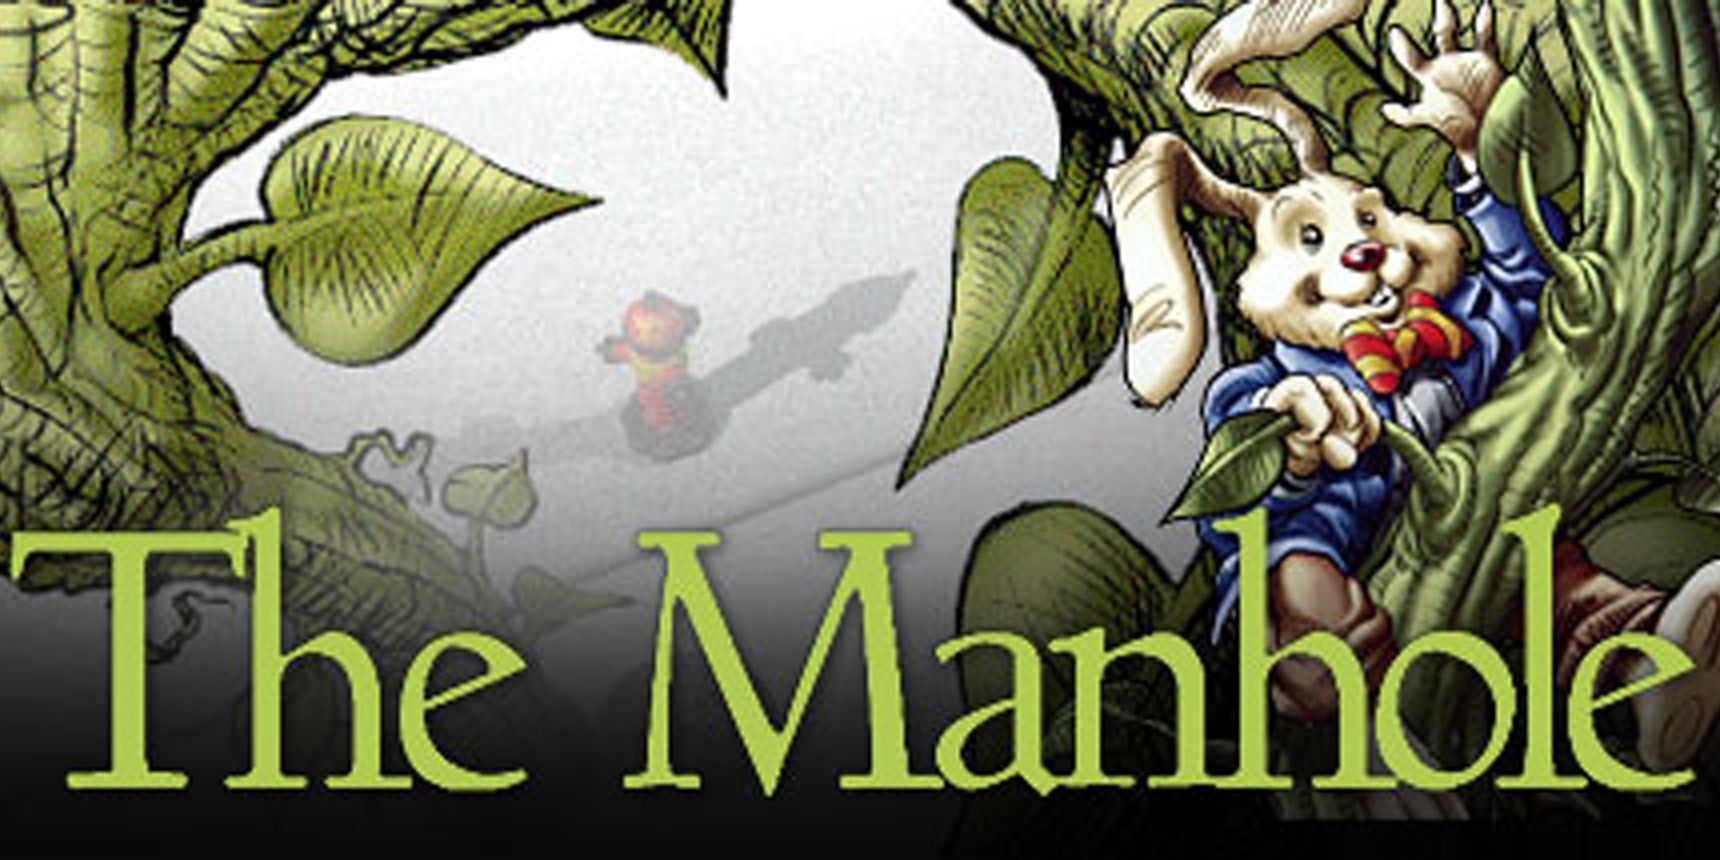 Manhole title poster image cropped - cartoon rabbit in a blue suit surrounded by plants while in a hole